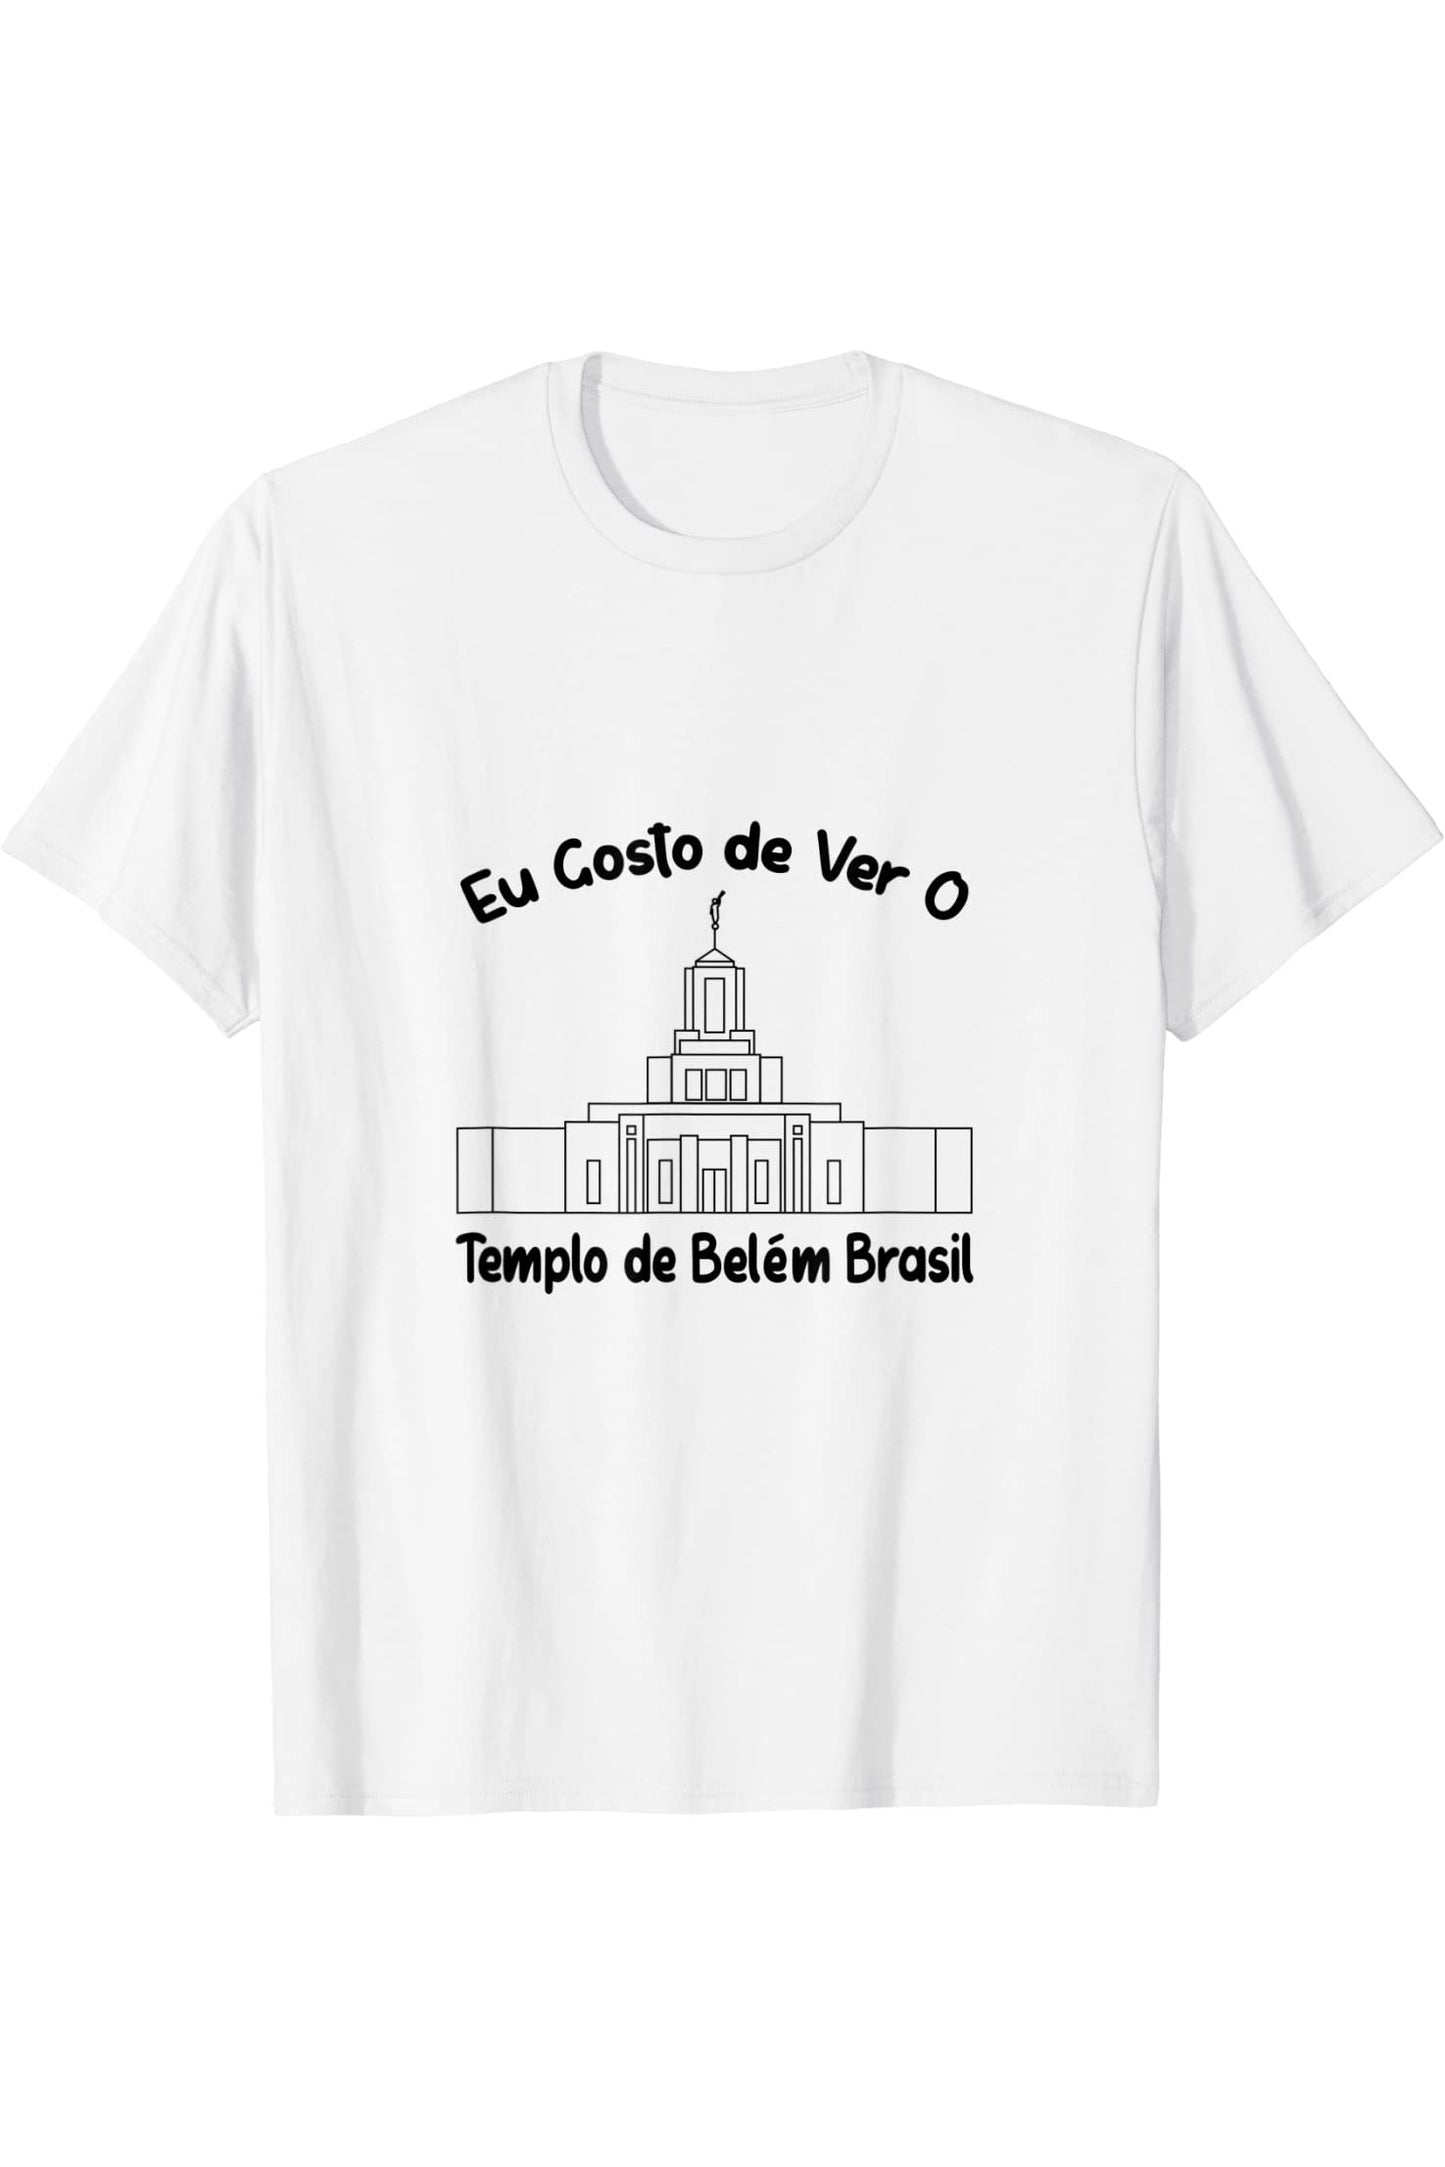 Belem Brazil Temple T-Shirt - Primary Style (Portuguese) US